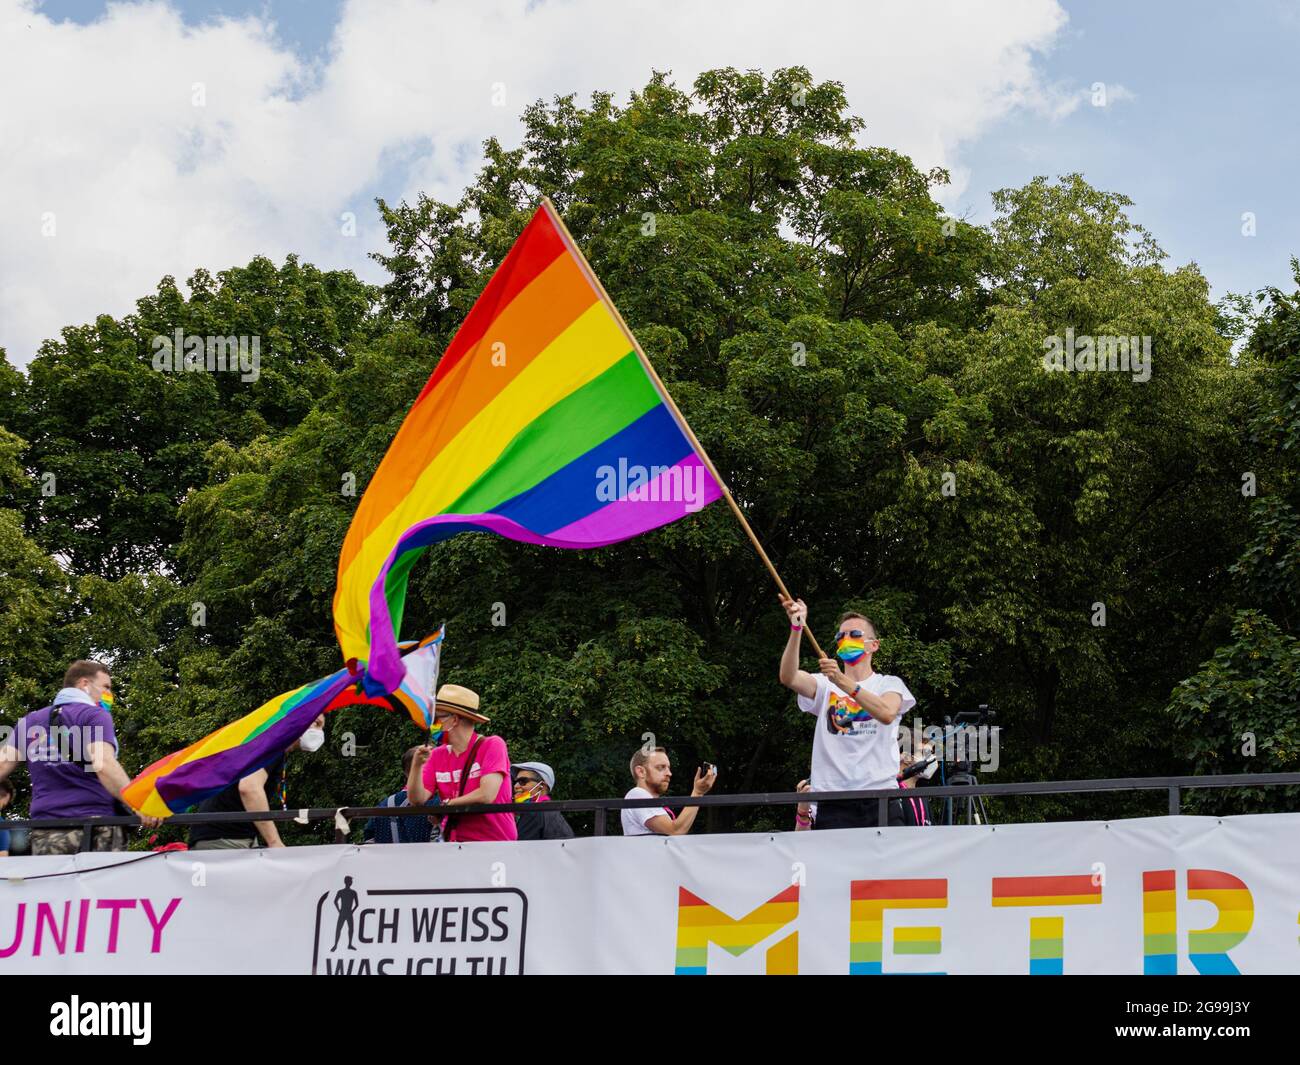 Berlin, Germany - July 24, 2021 - A man waves a rainbow flag on a truck at the Christopher Street Day (CSD) demonstration in Berlin Stock Photo